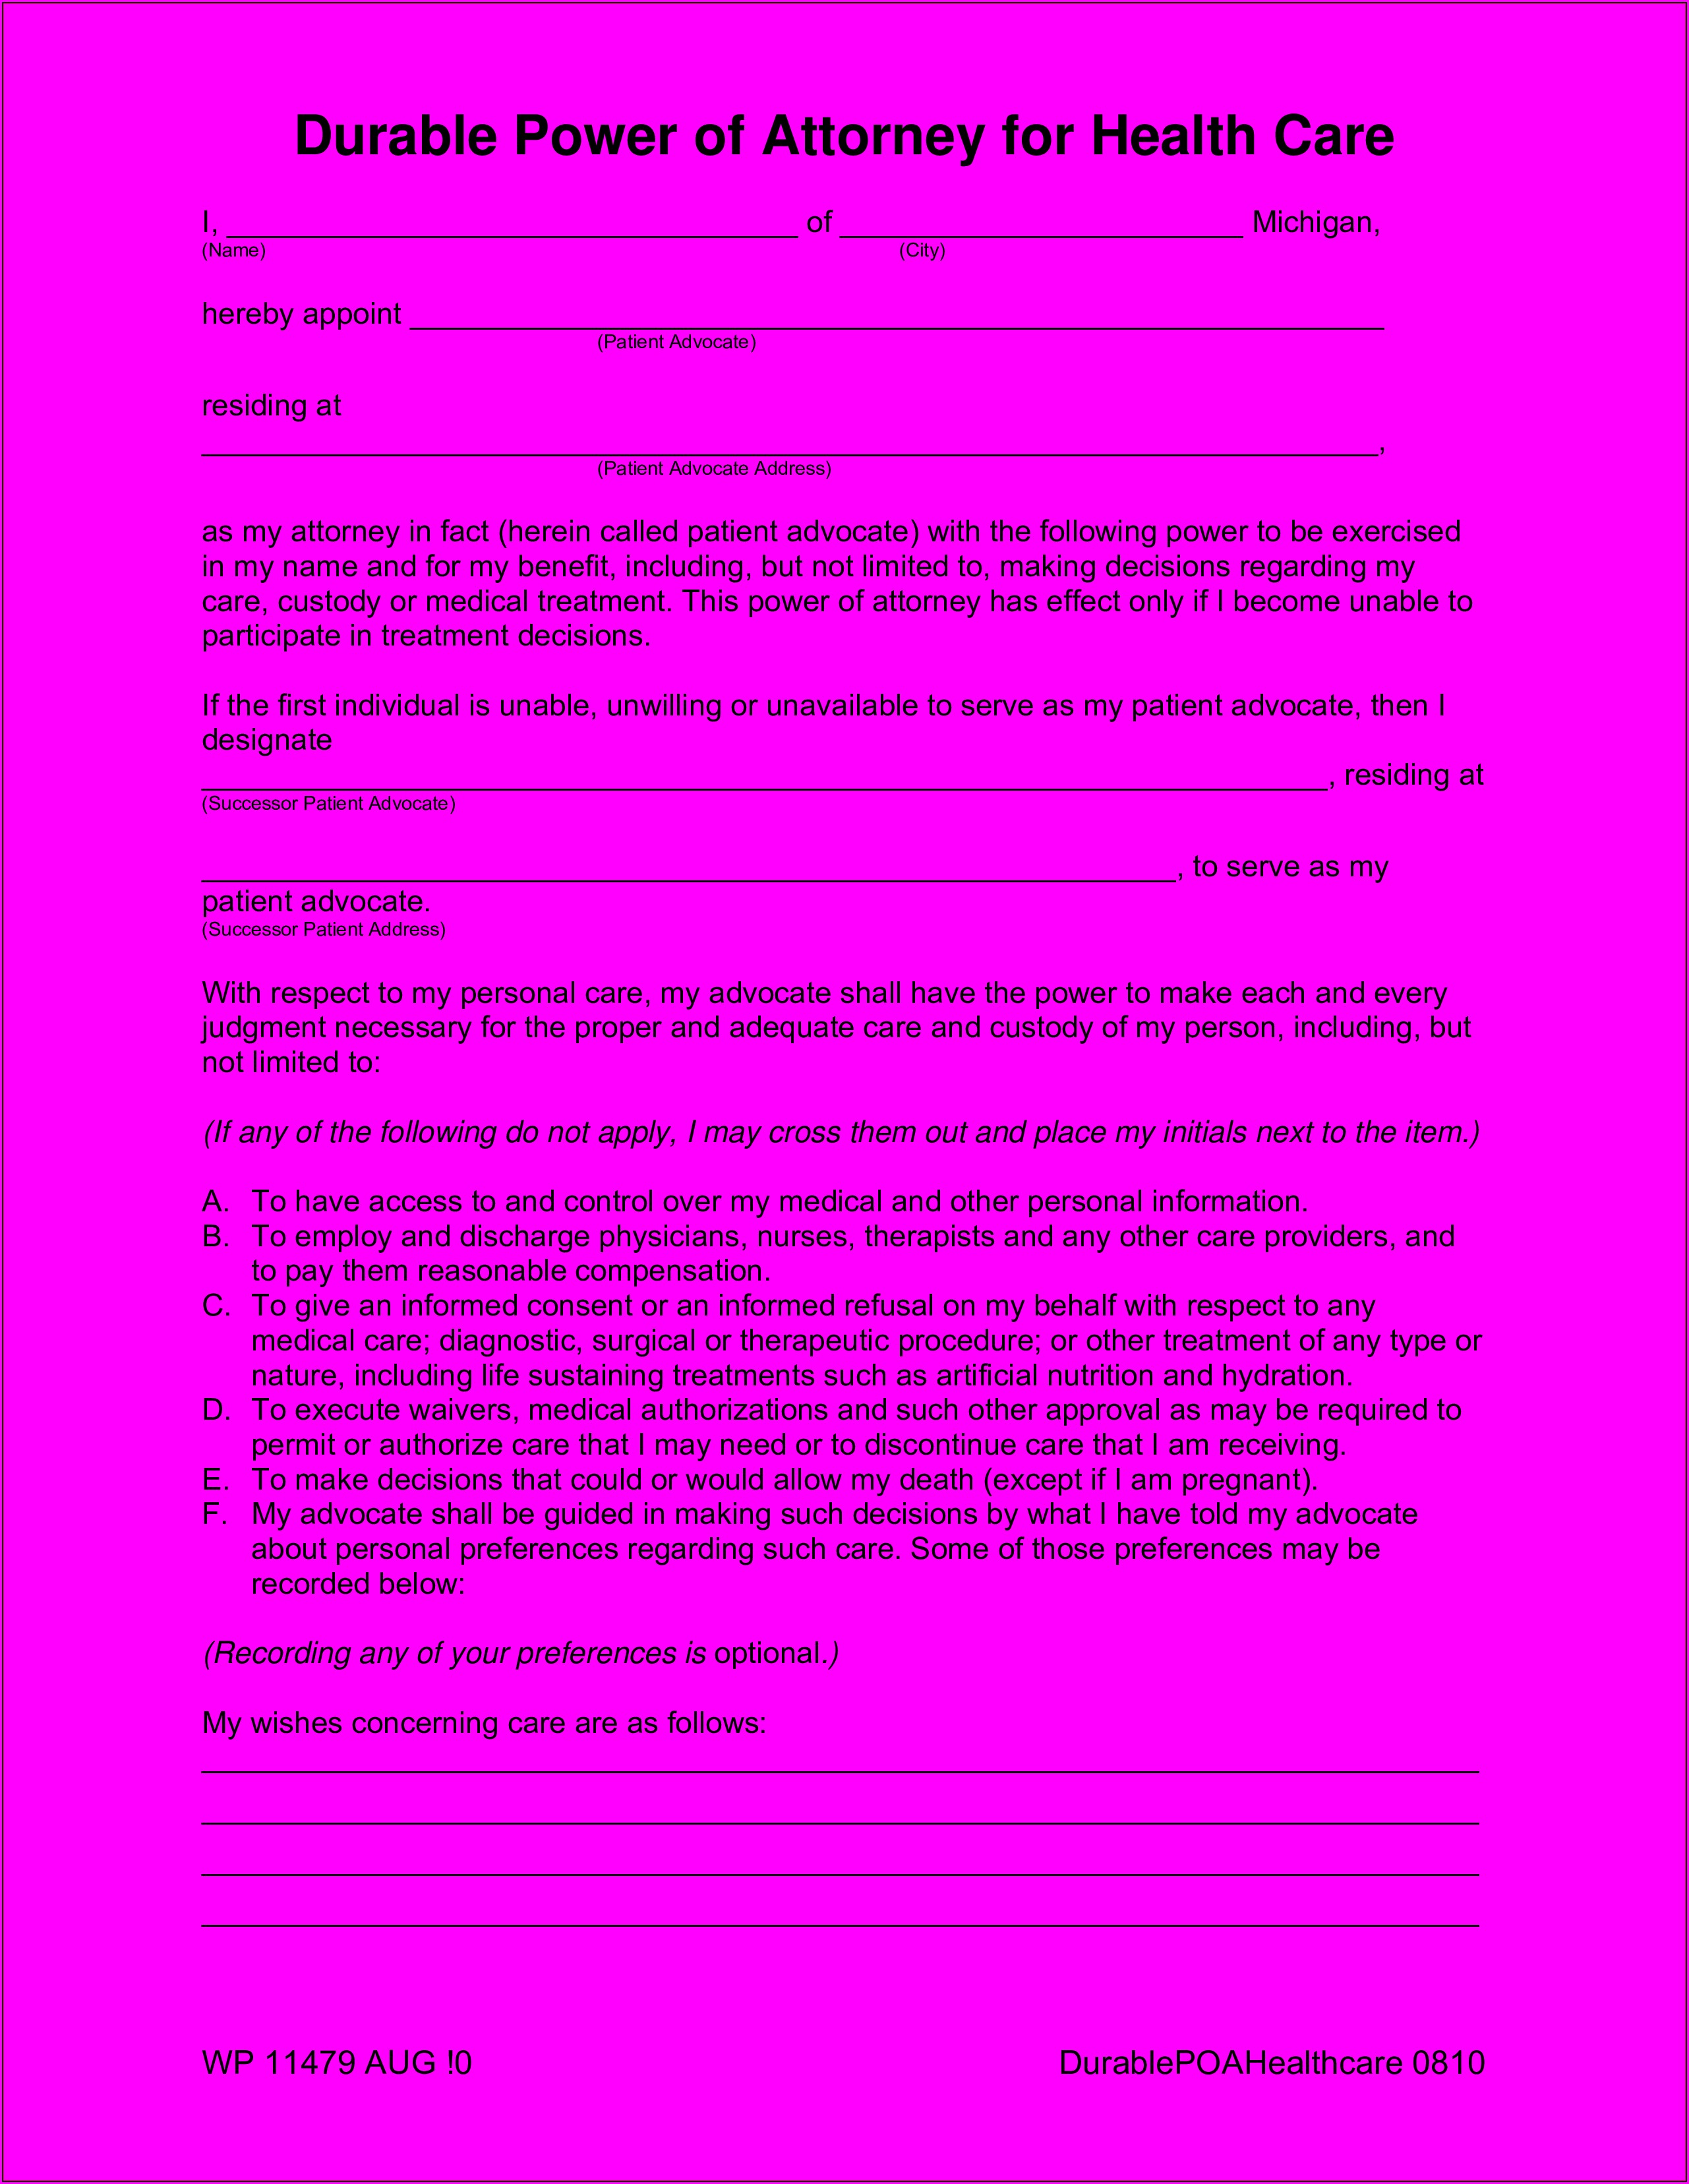 Medical Power Of Attorney Form Templates